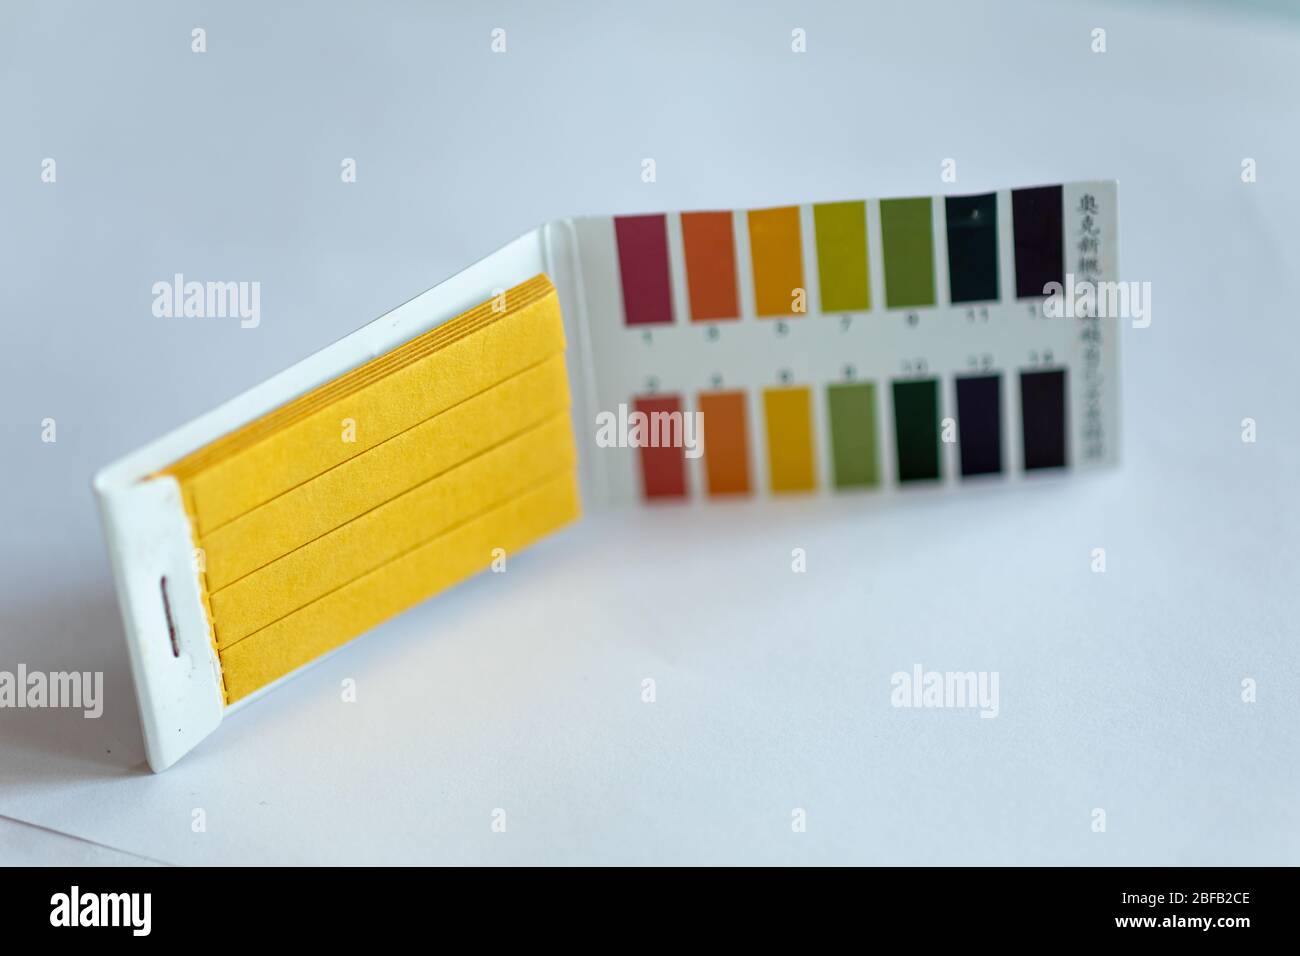 Universal Litmus pH test and color scale on isolated background Stock Photo